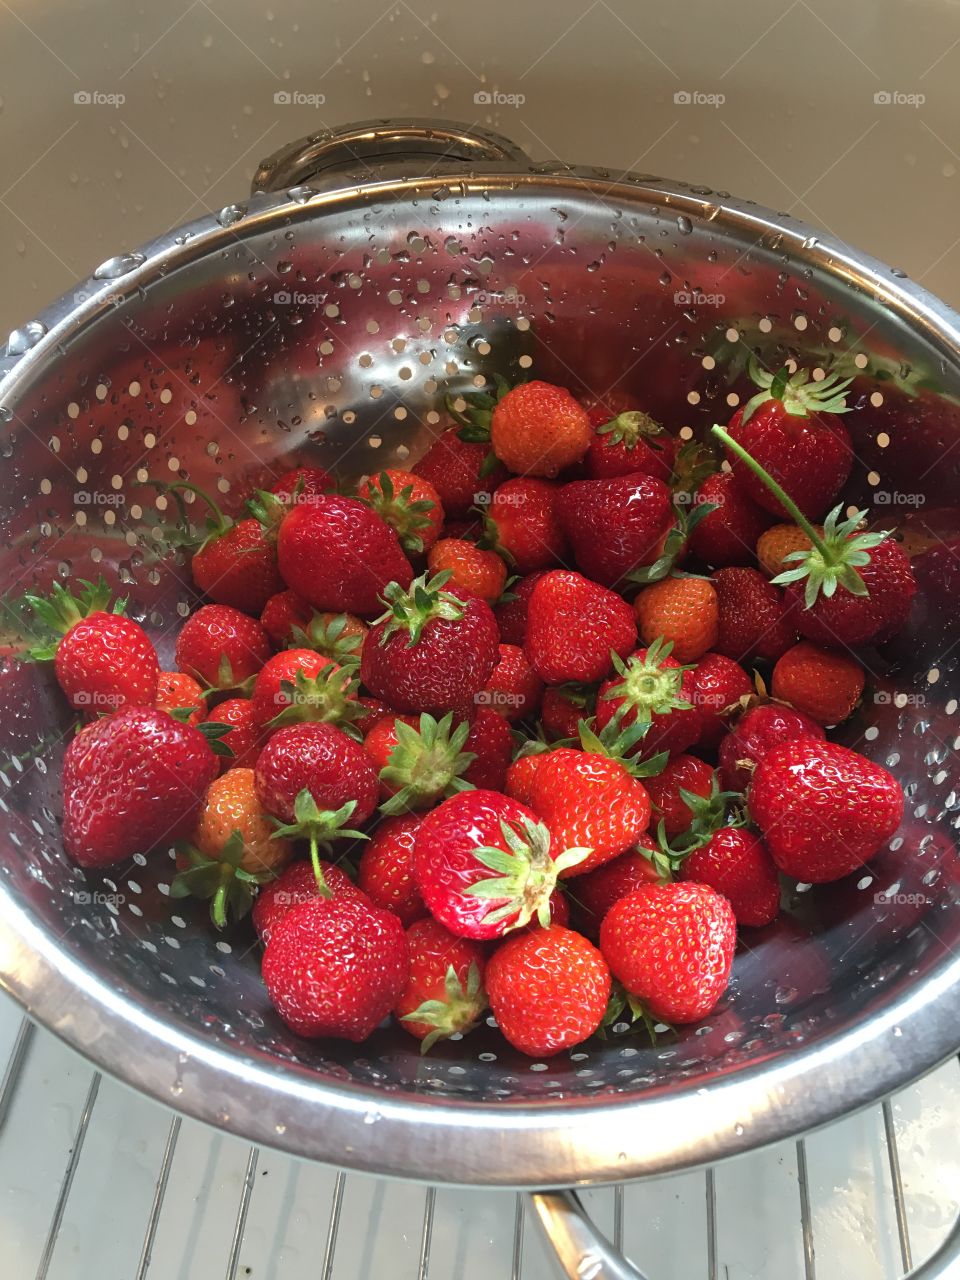 Fresh picked strawberries from the garden